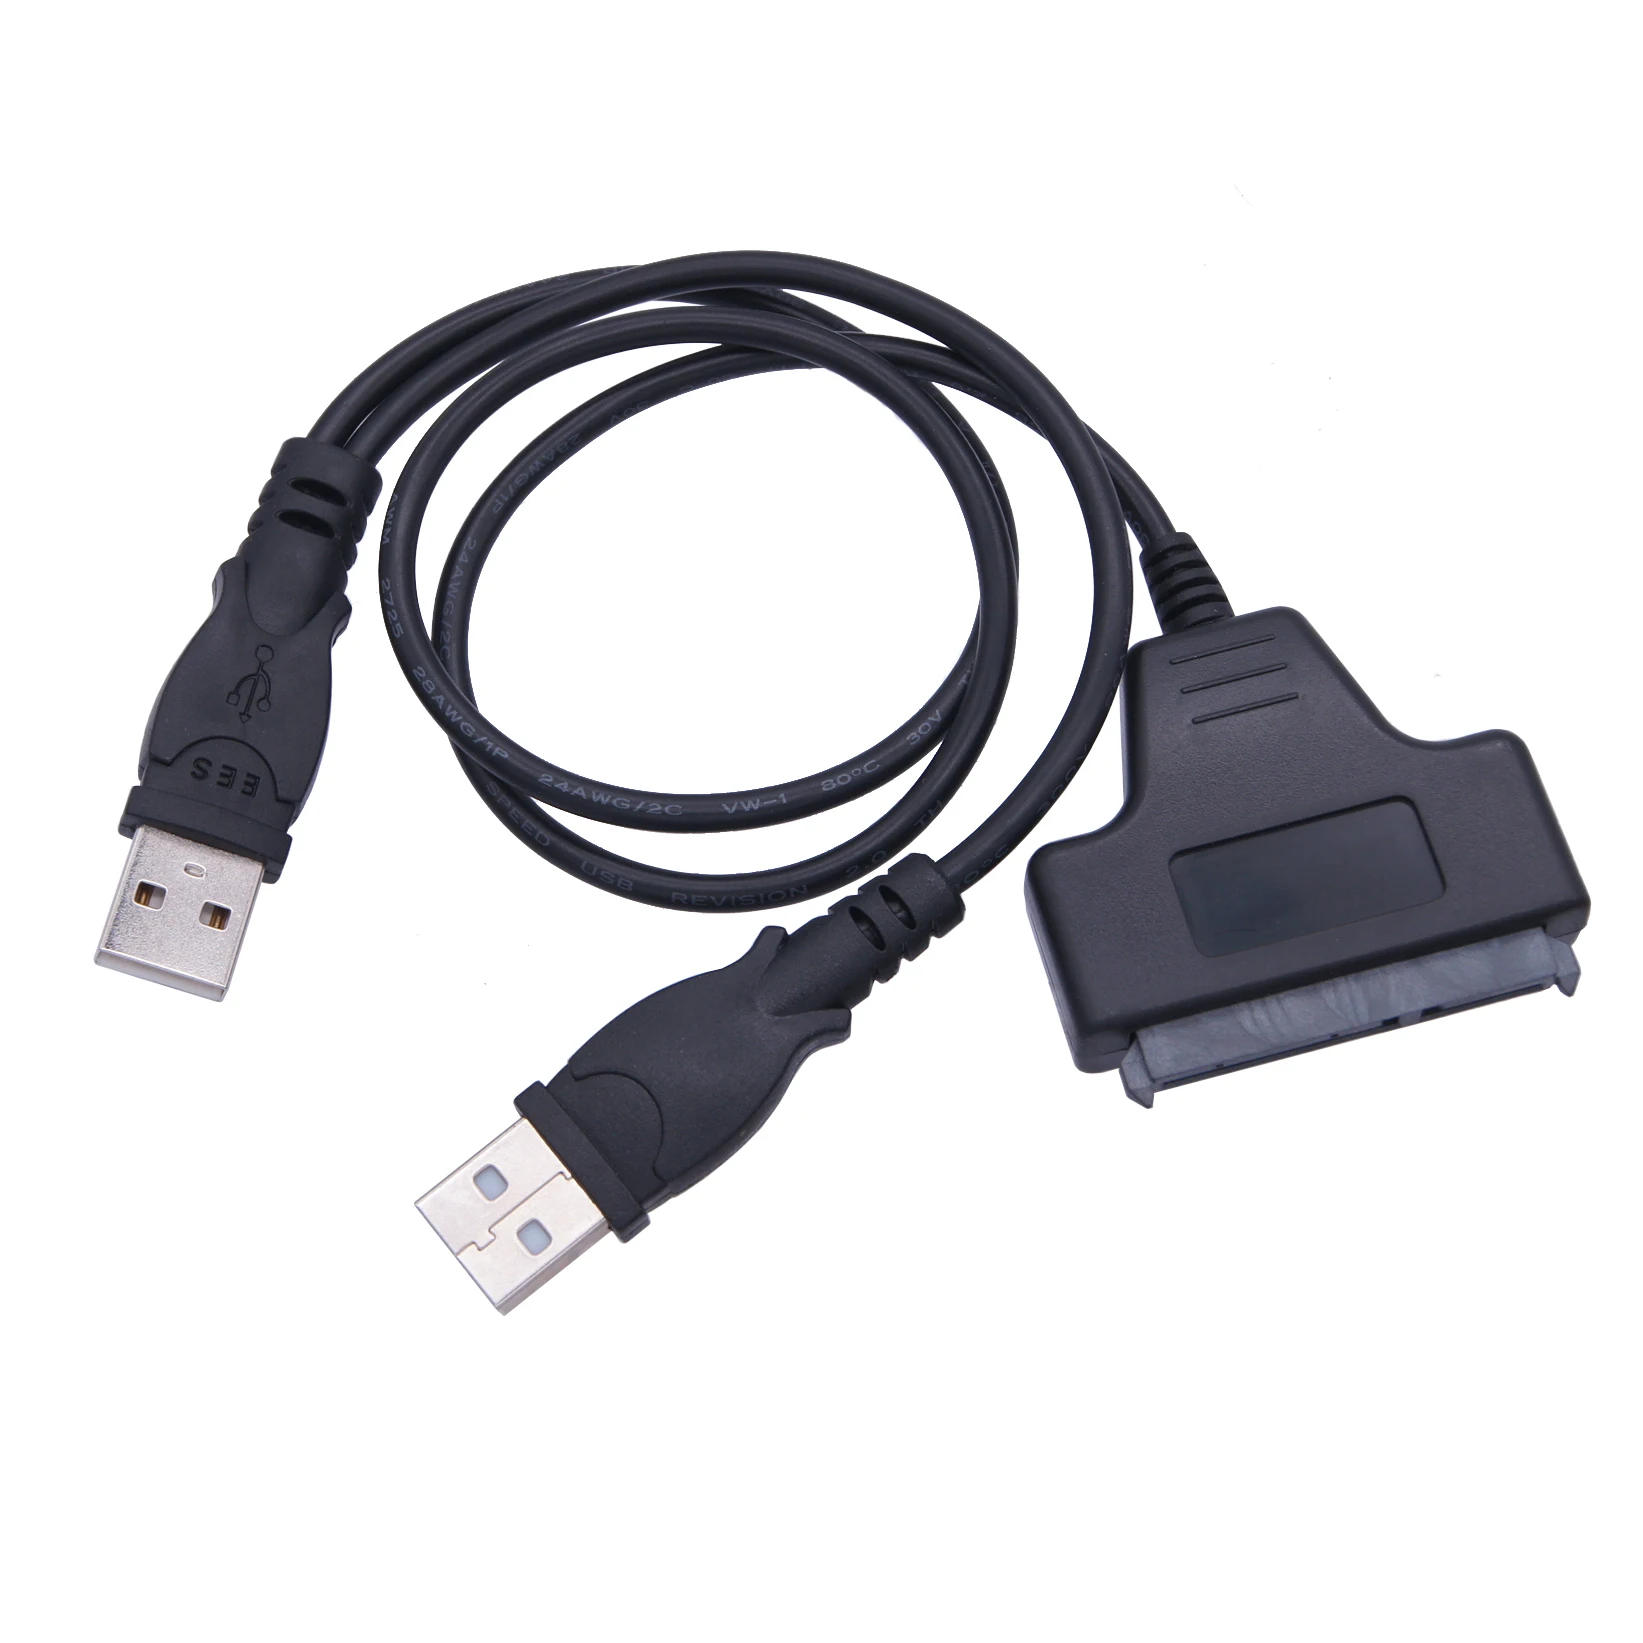 Computer Cables 480MB/S Transmission Speed USB 2.0 to Converter SATA Interface Copper ABS Shell for 2.5 Inch SATA Notebook Hard Drive Cable Length: 0.33m 